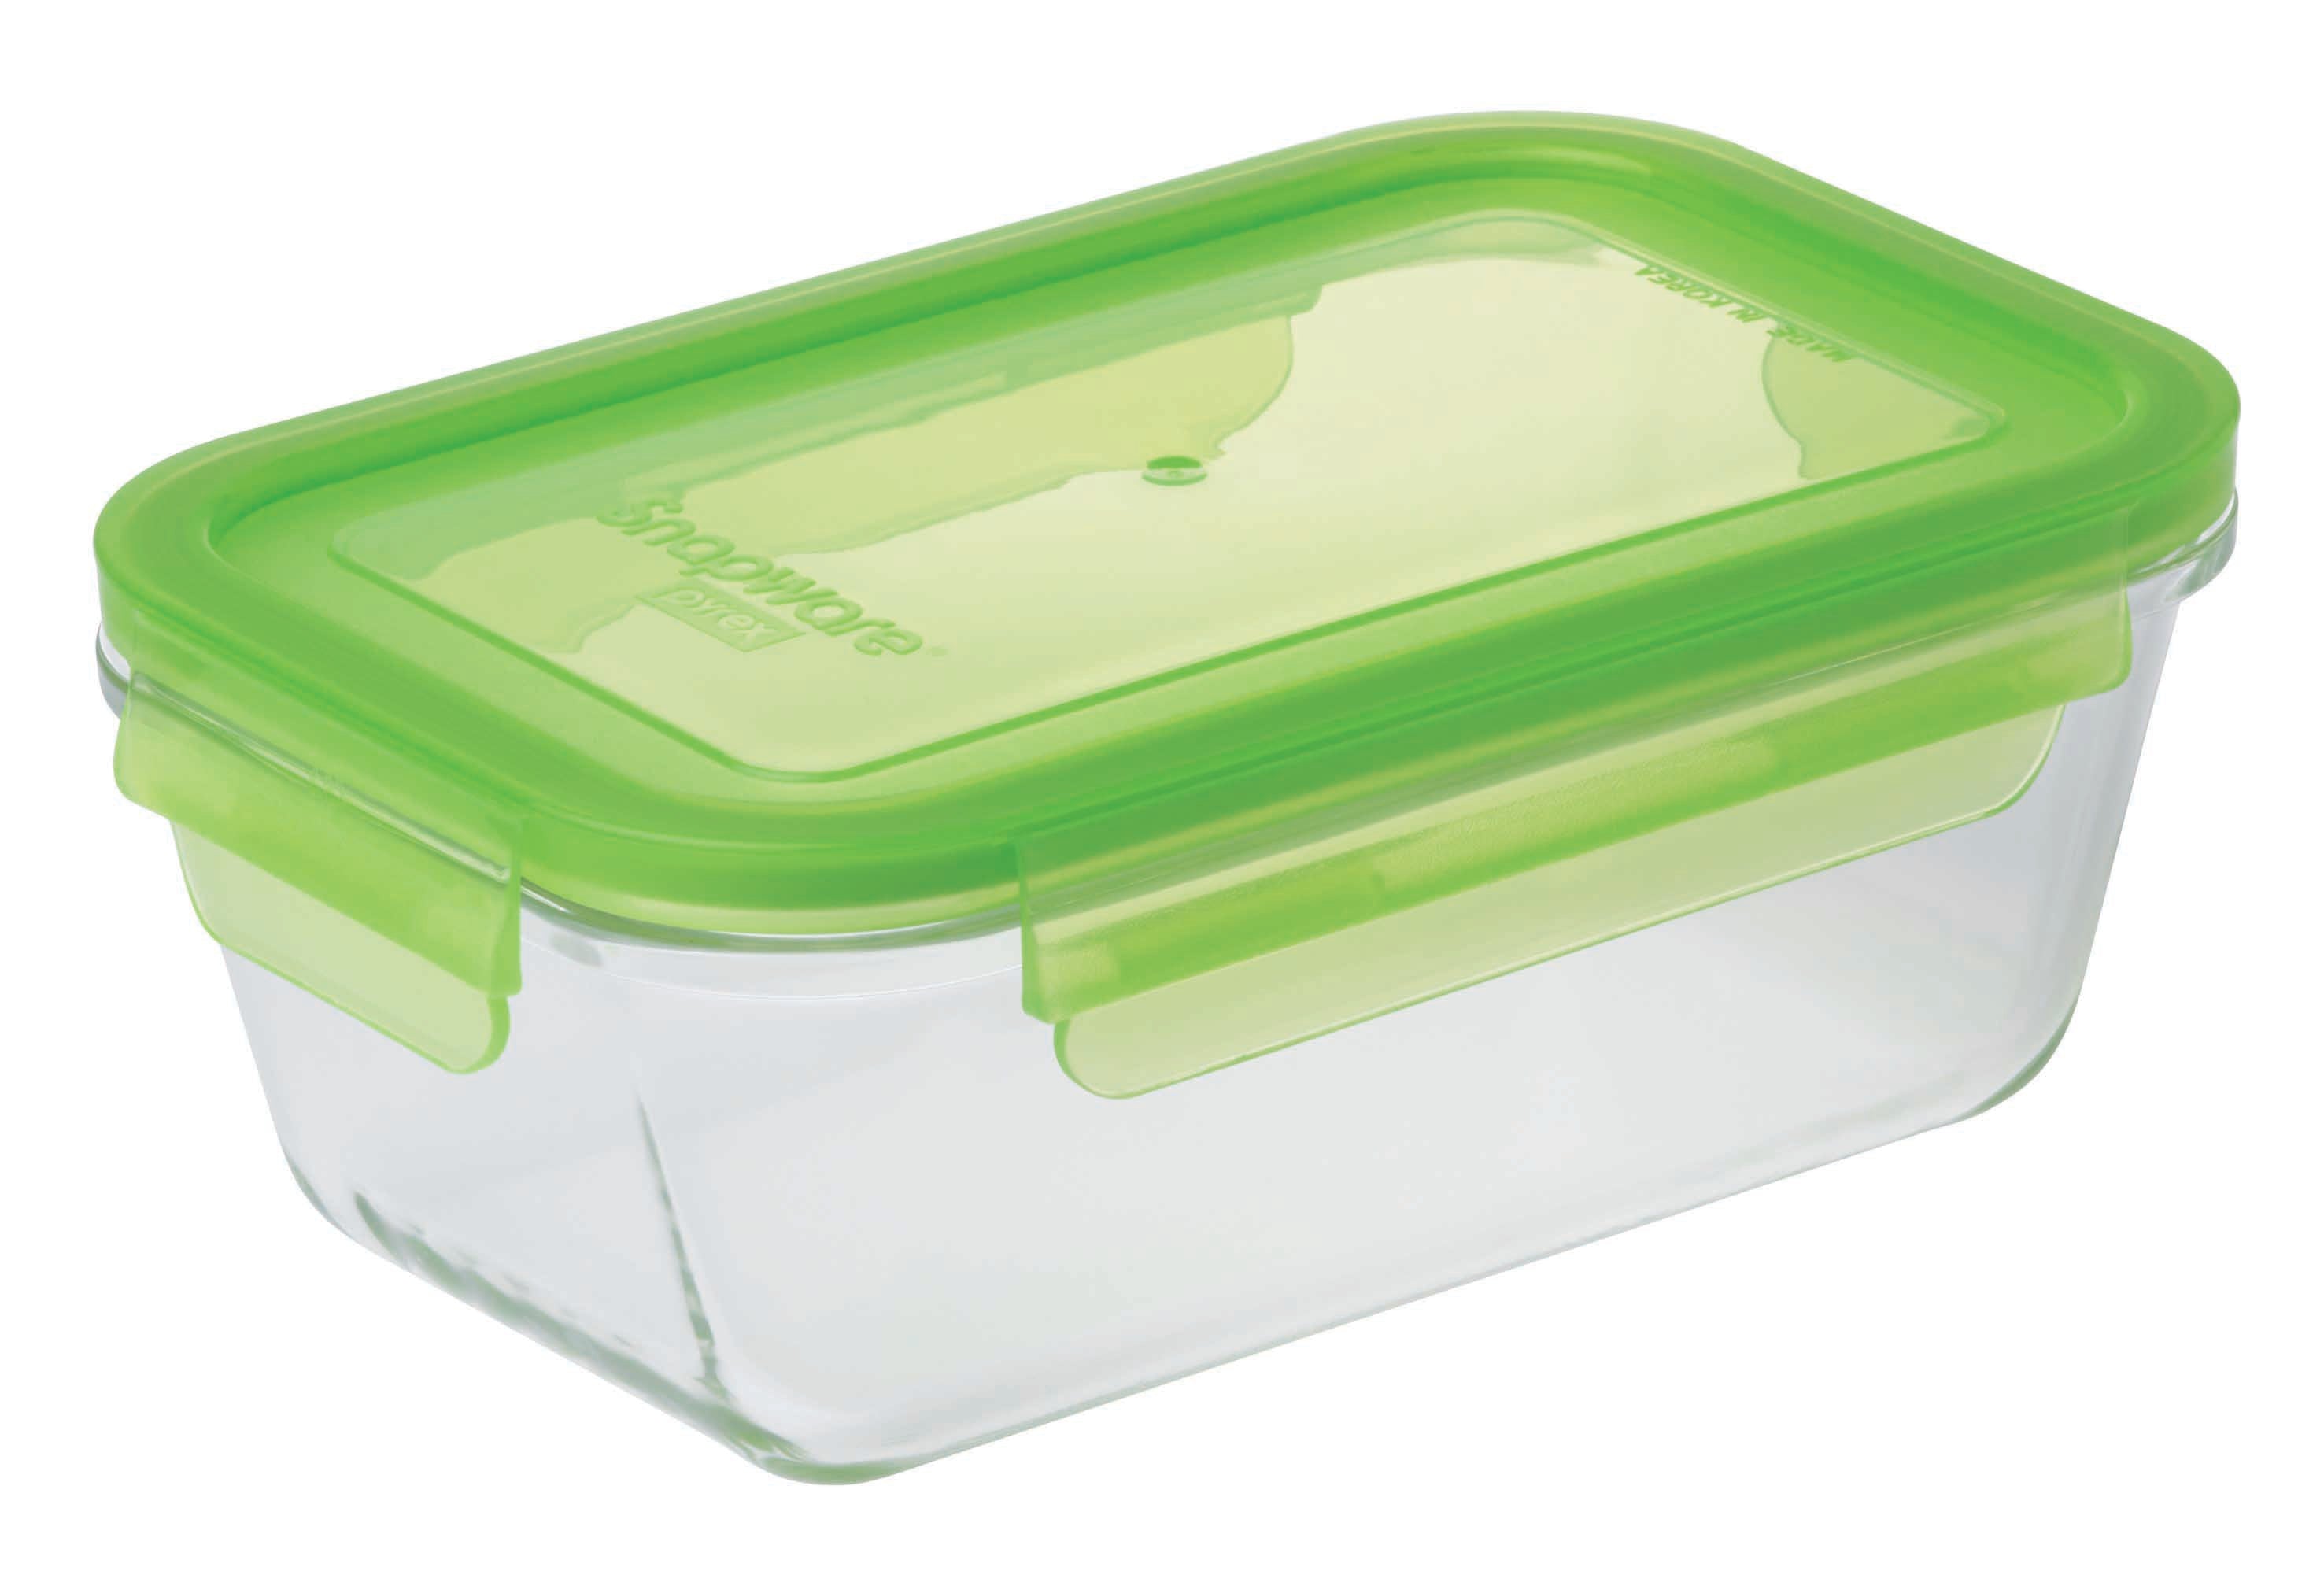 Snapware Food/Kitchen Food Storage Containers